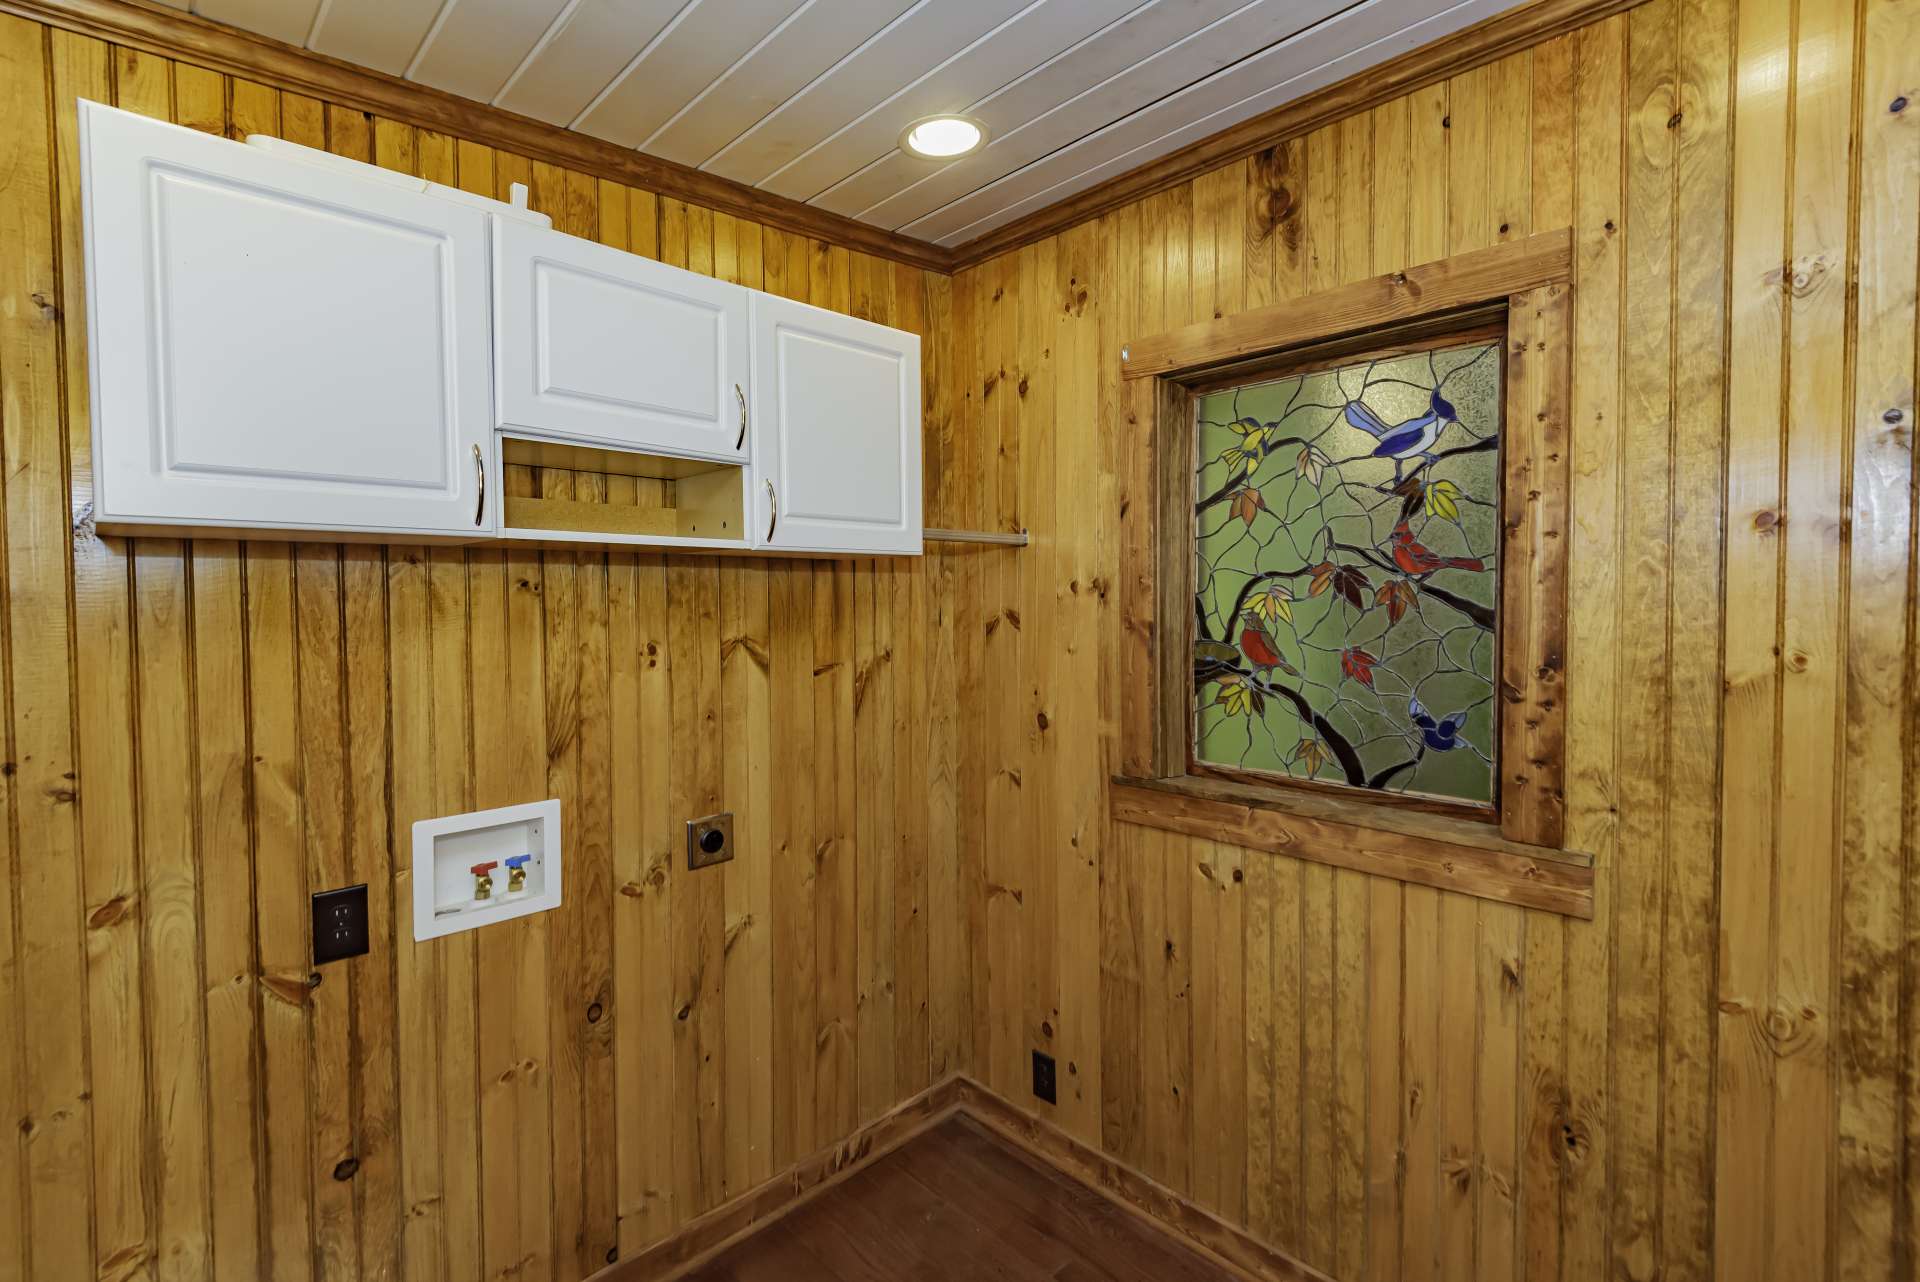 The laundry room completes the main level of the home.